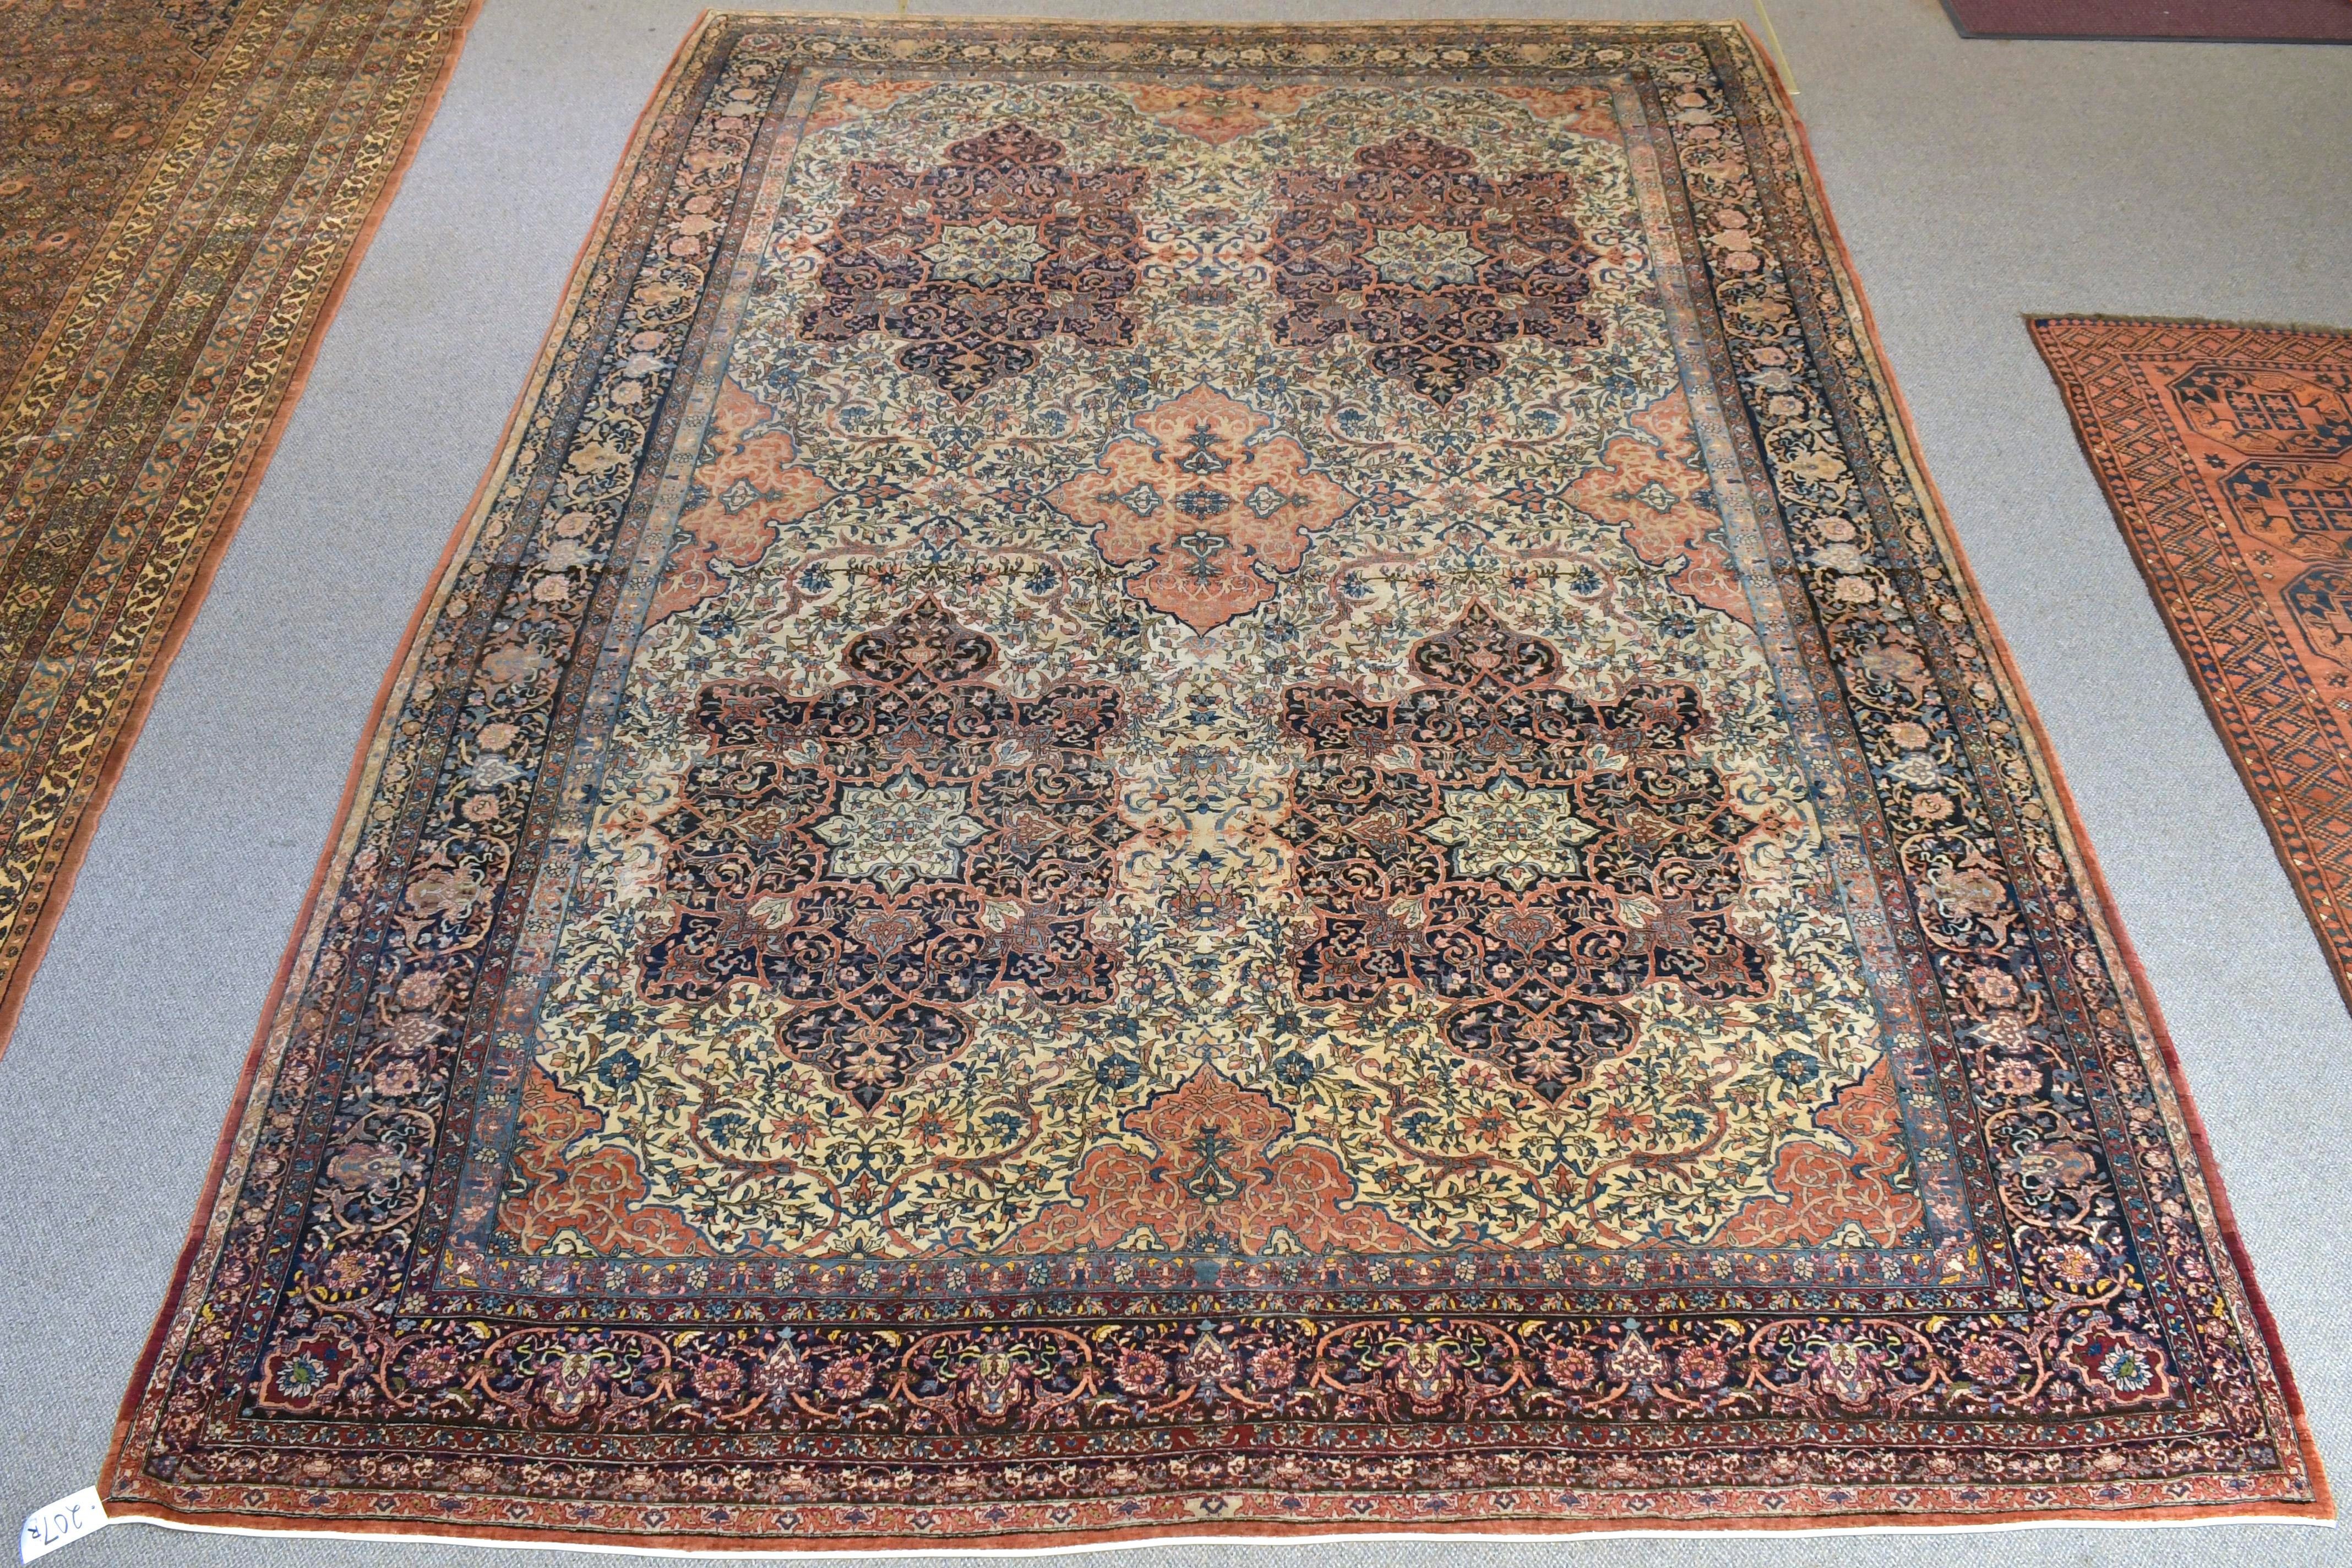 FINE LARGE ROOM SIZE PERSIAN RUG.